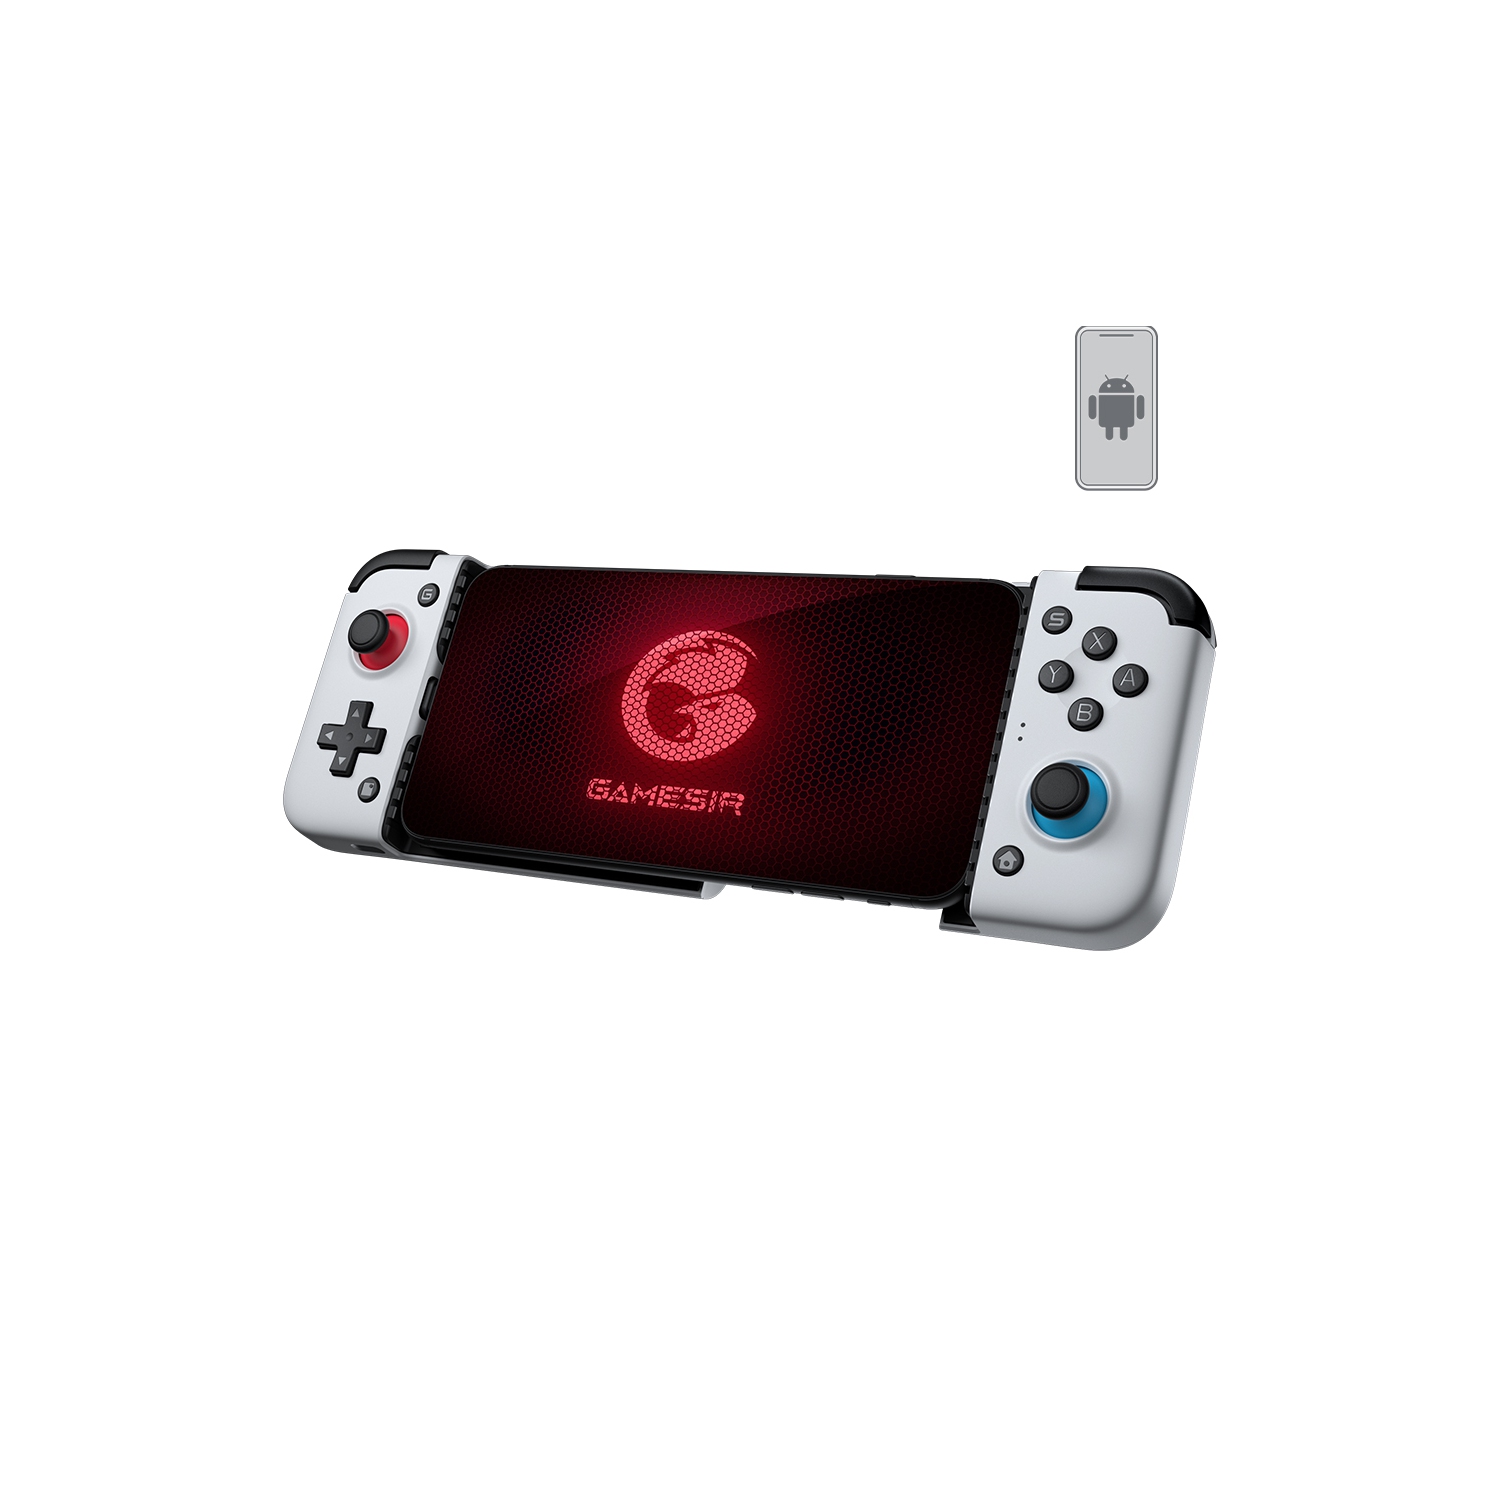 GameSir X2 Type-C Mobile Game Controller for Android Phone, Xbox Cloud Google Stadia Gaming Controller, Wired Plug and Play E-Sports Gamepad